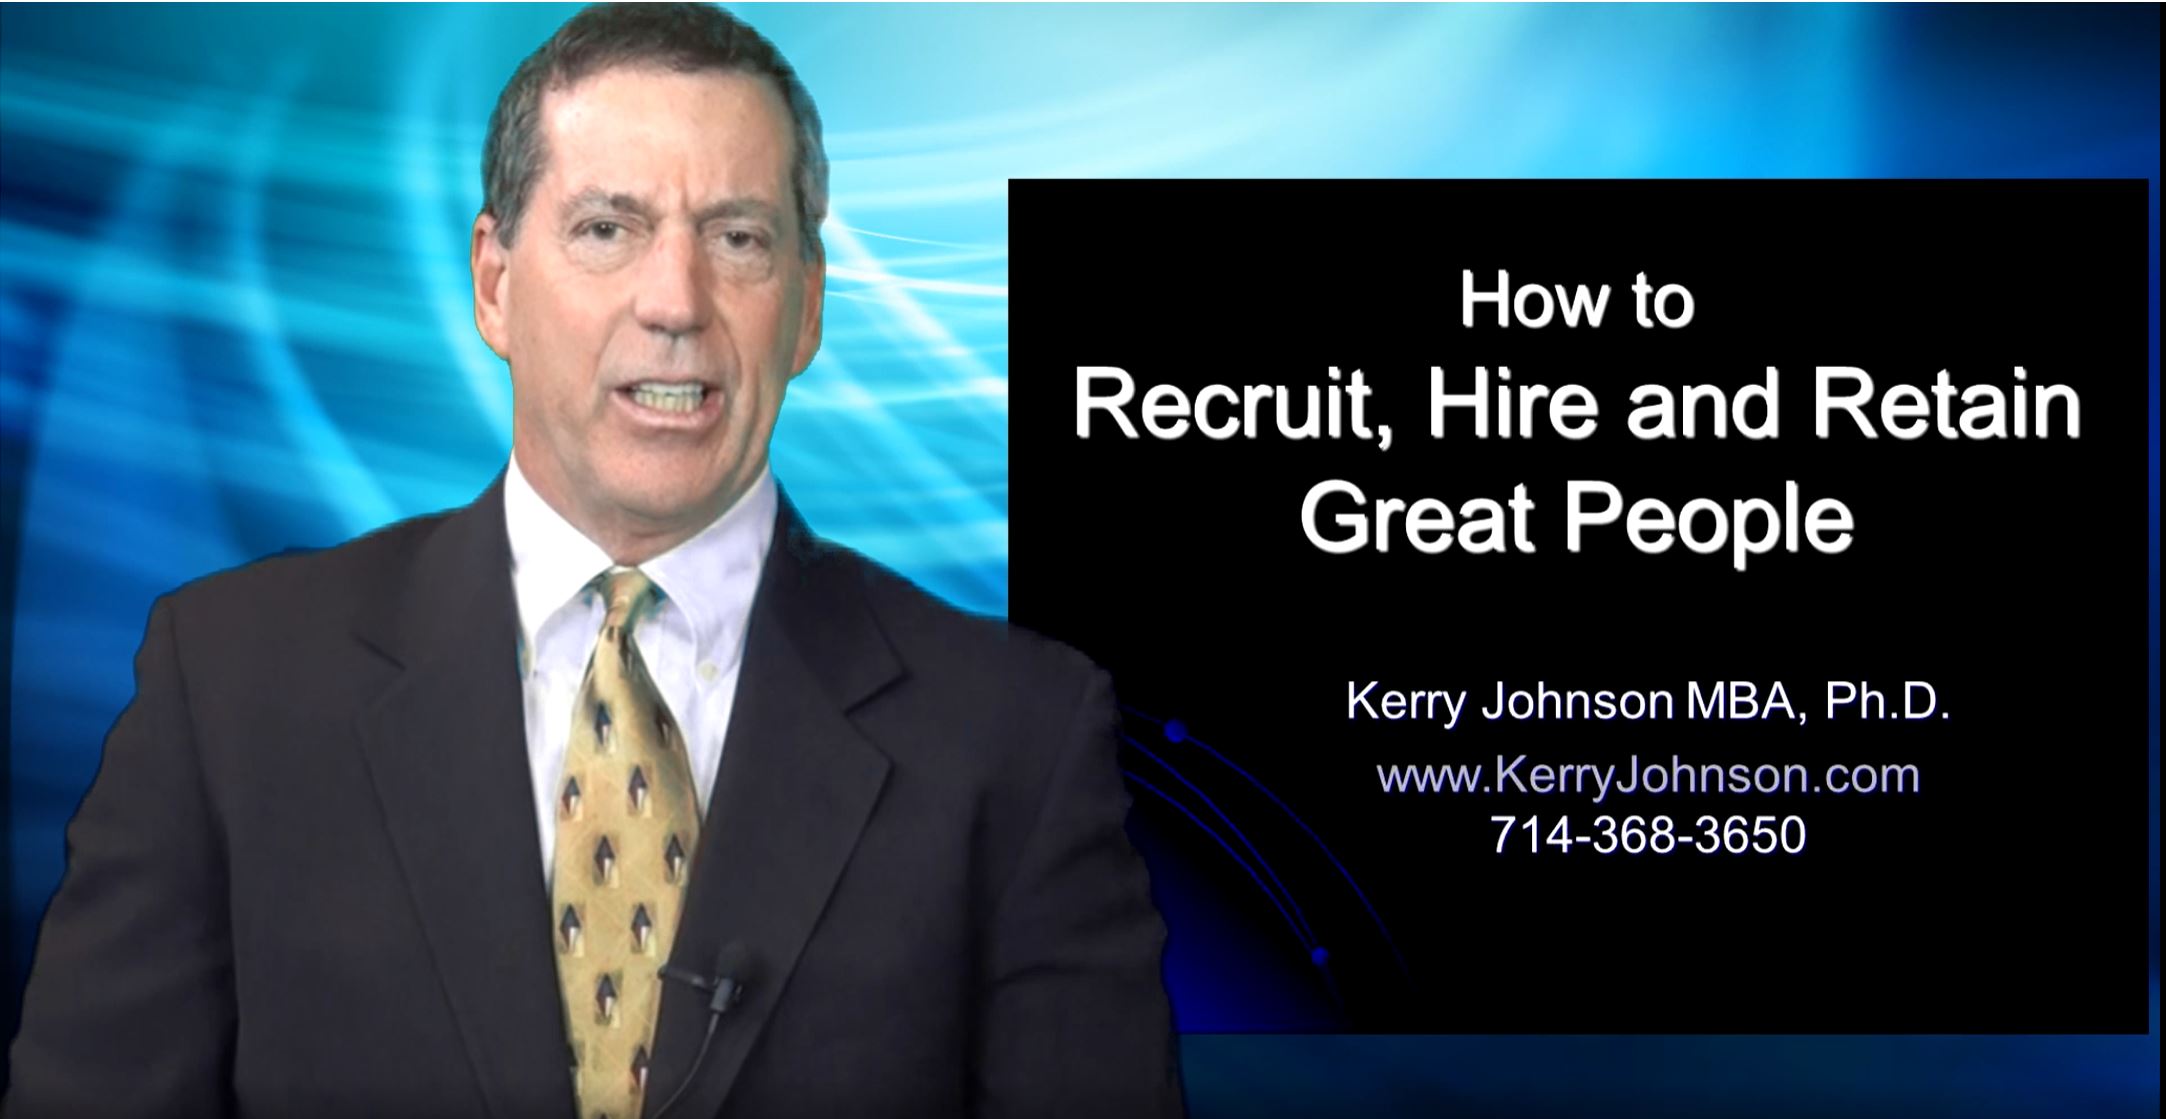 How to Recruit, Hire and Retain Great People Part 2